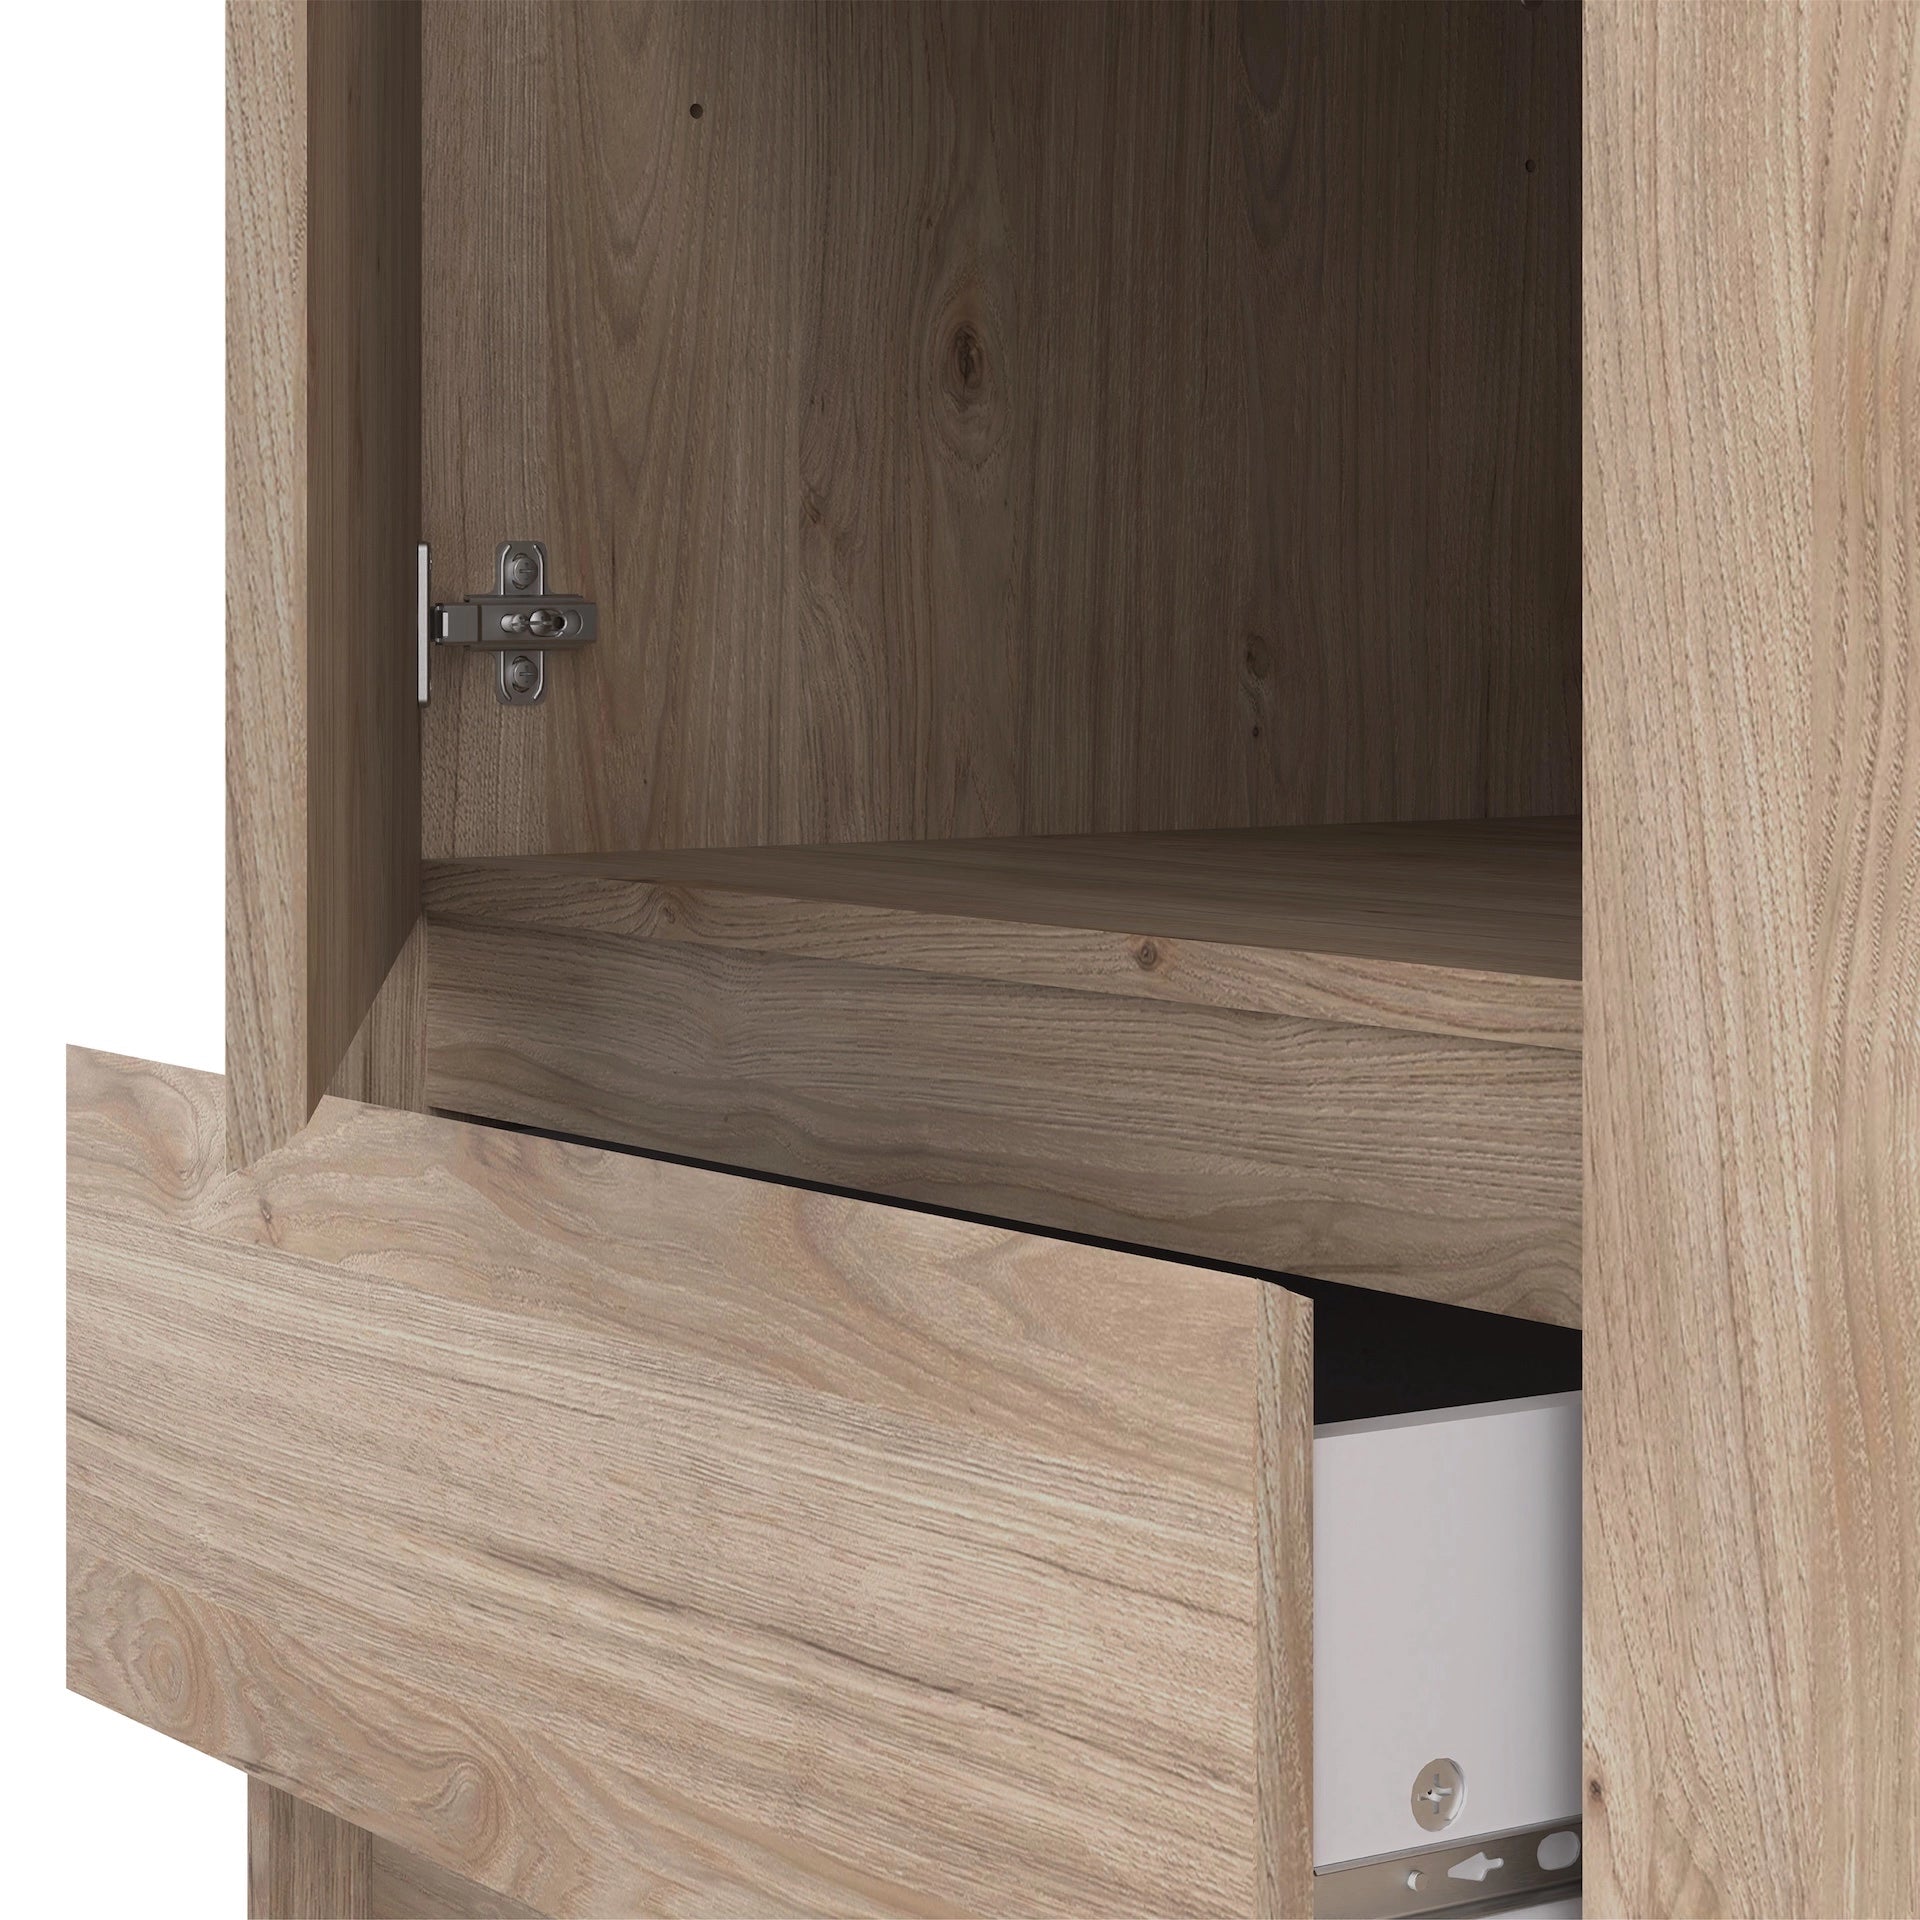 Furniture To Go Naia Wardrobe with 1 Sliding Door + 1 Door + 3 Drawers in Oak Structure Jackson Hickory